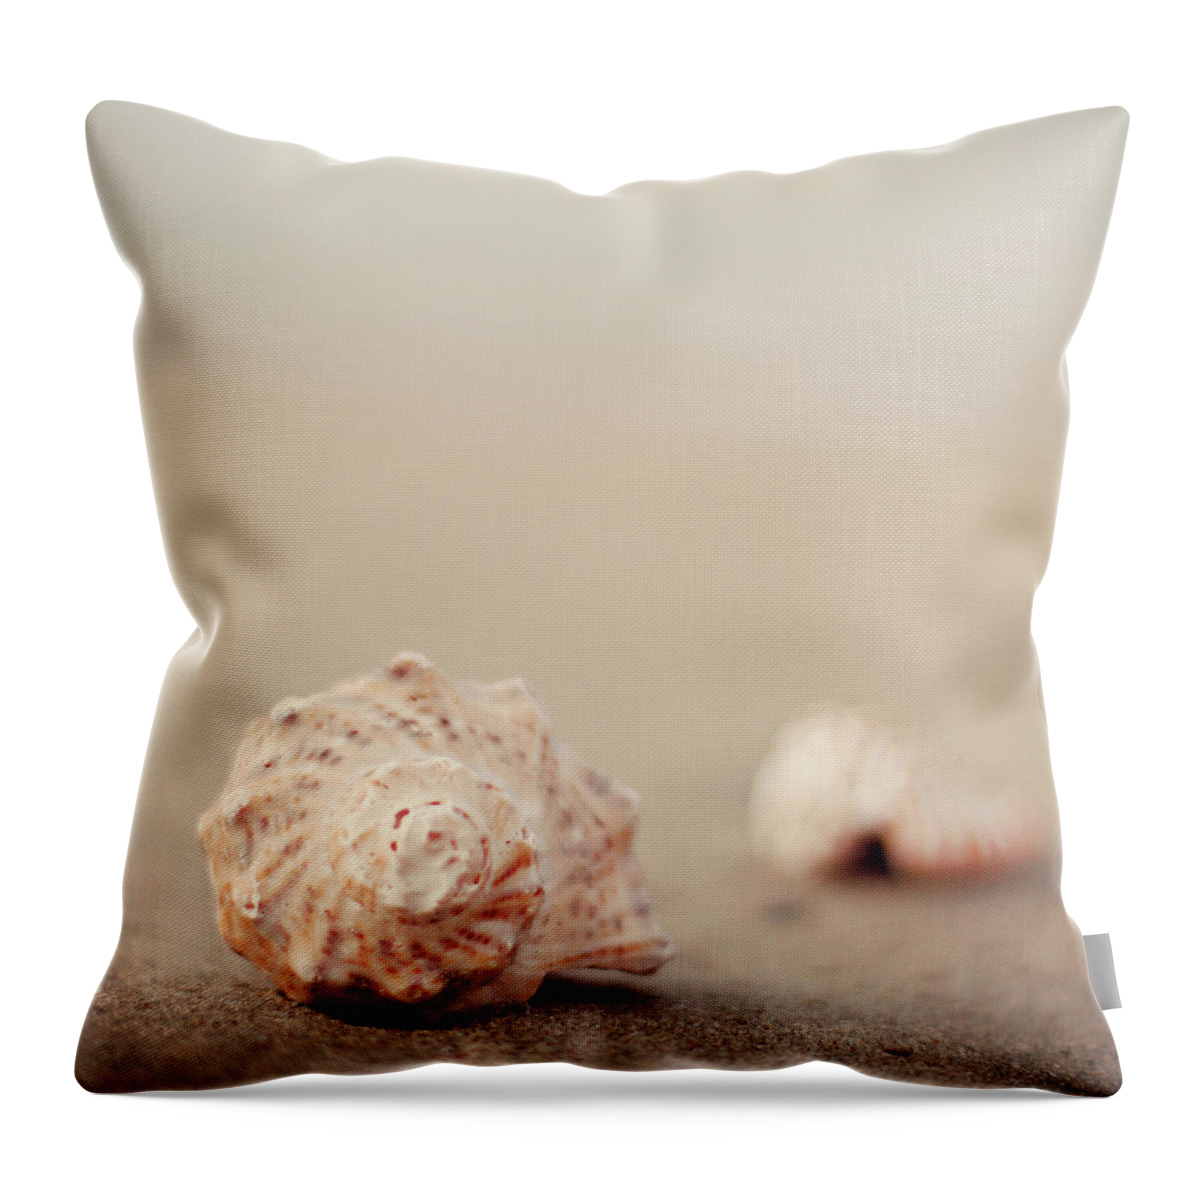 Animal Shell Throw Pillow featuring the photograph Close Up Of Shells On Beach by Copyright© Marianna Di Ferdinando